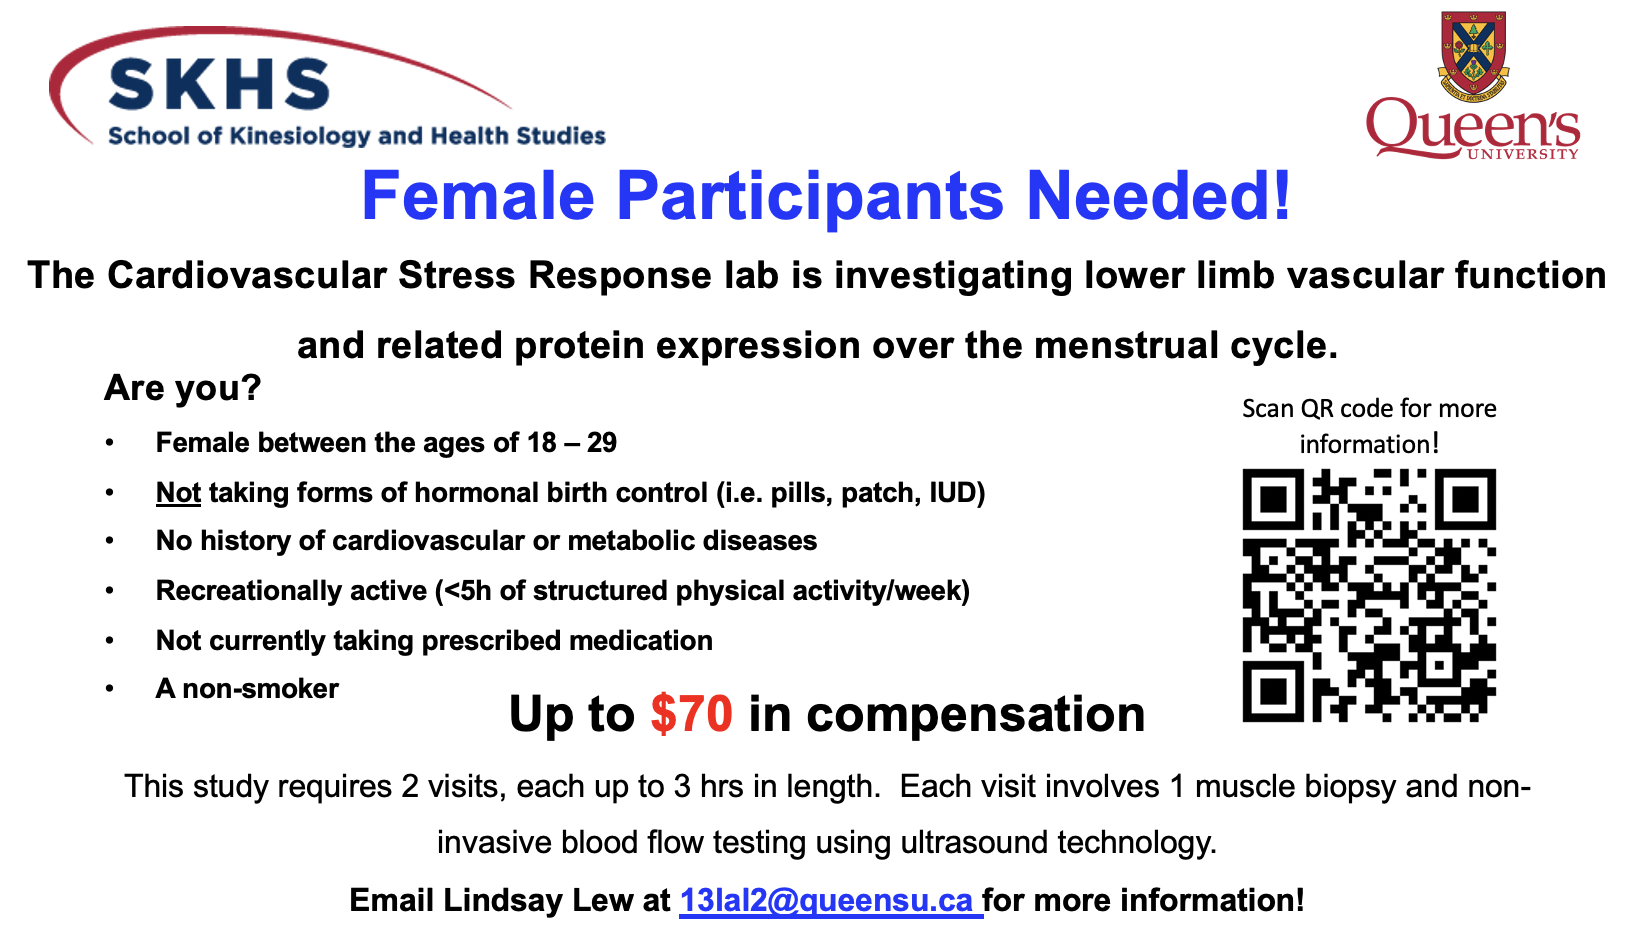 Female Research Study Participants Needed Flyer